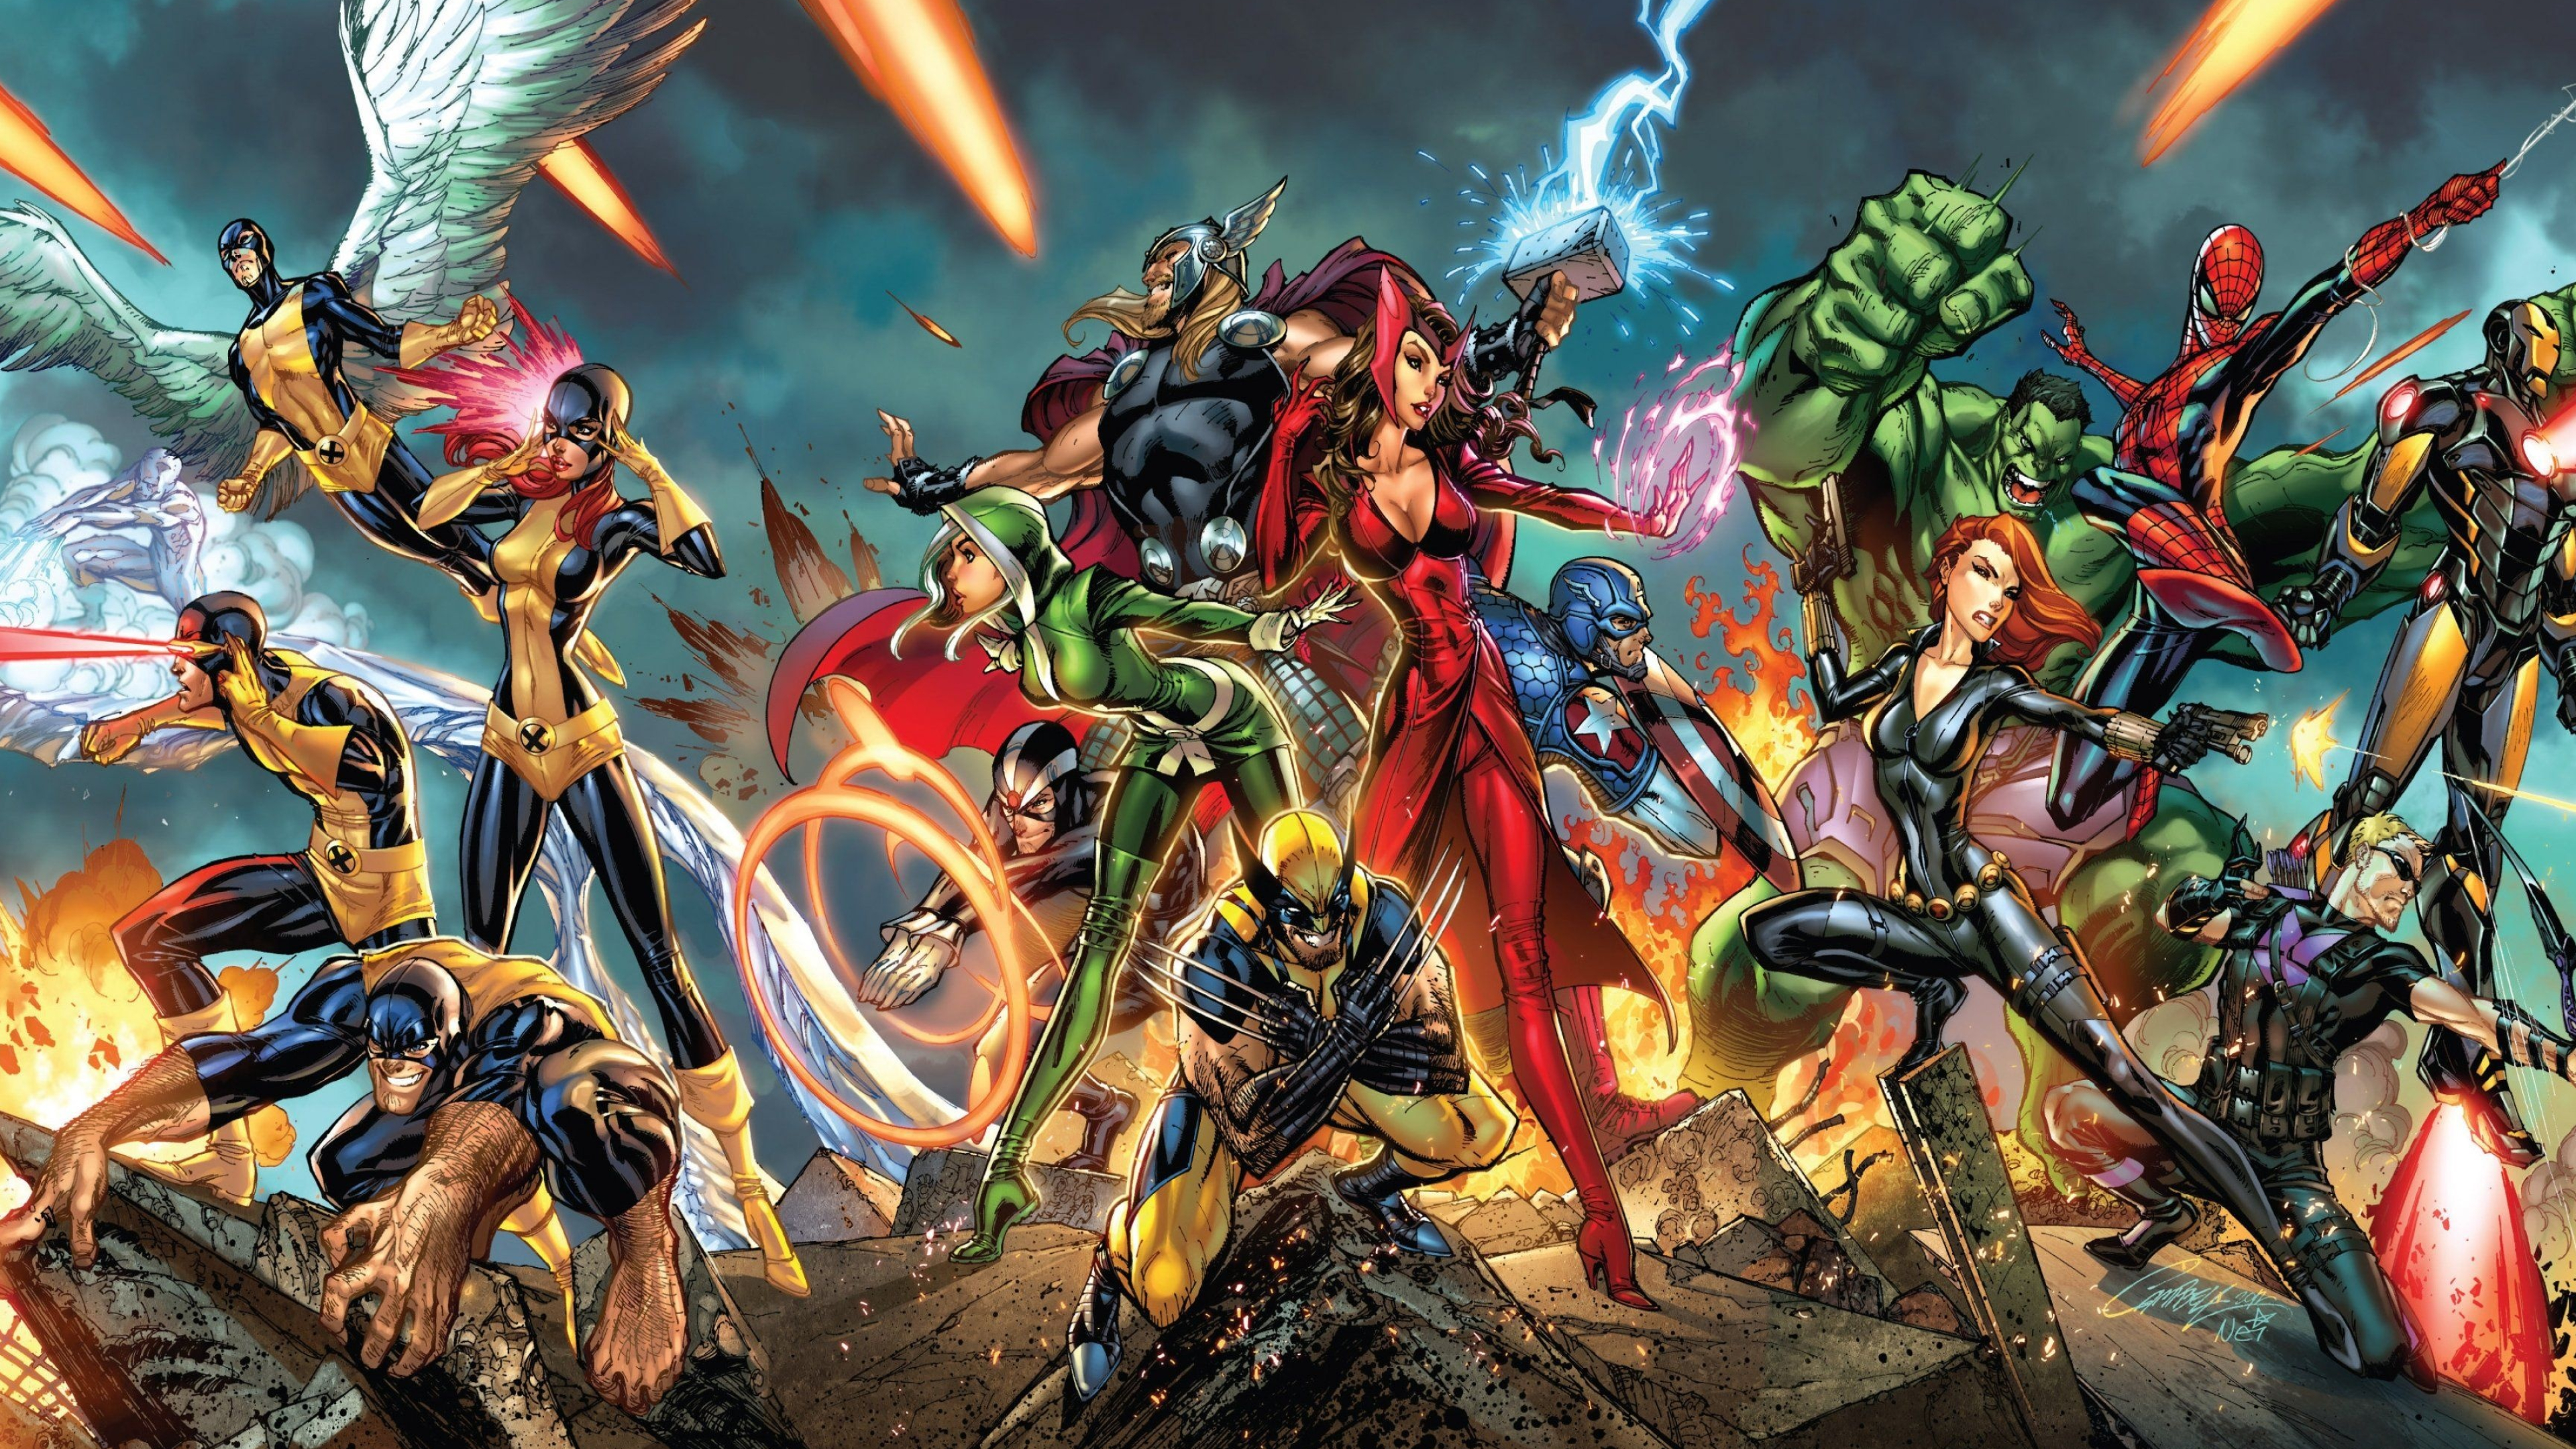 Marvel 3840 X 2160 Wallpapers - Top Free Marvel 3840 X 2160 Backgrounds 3840x2160